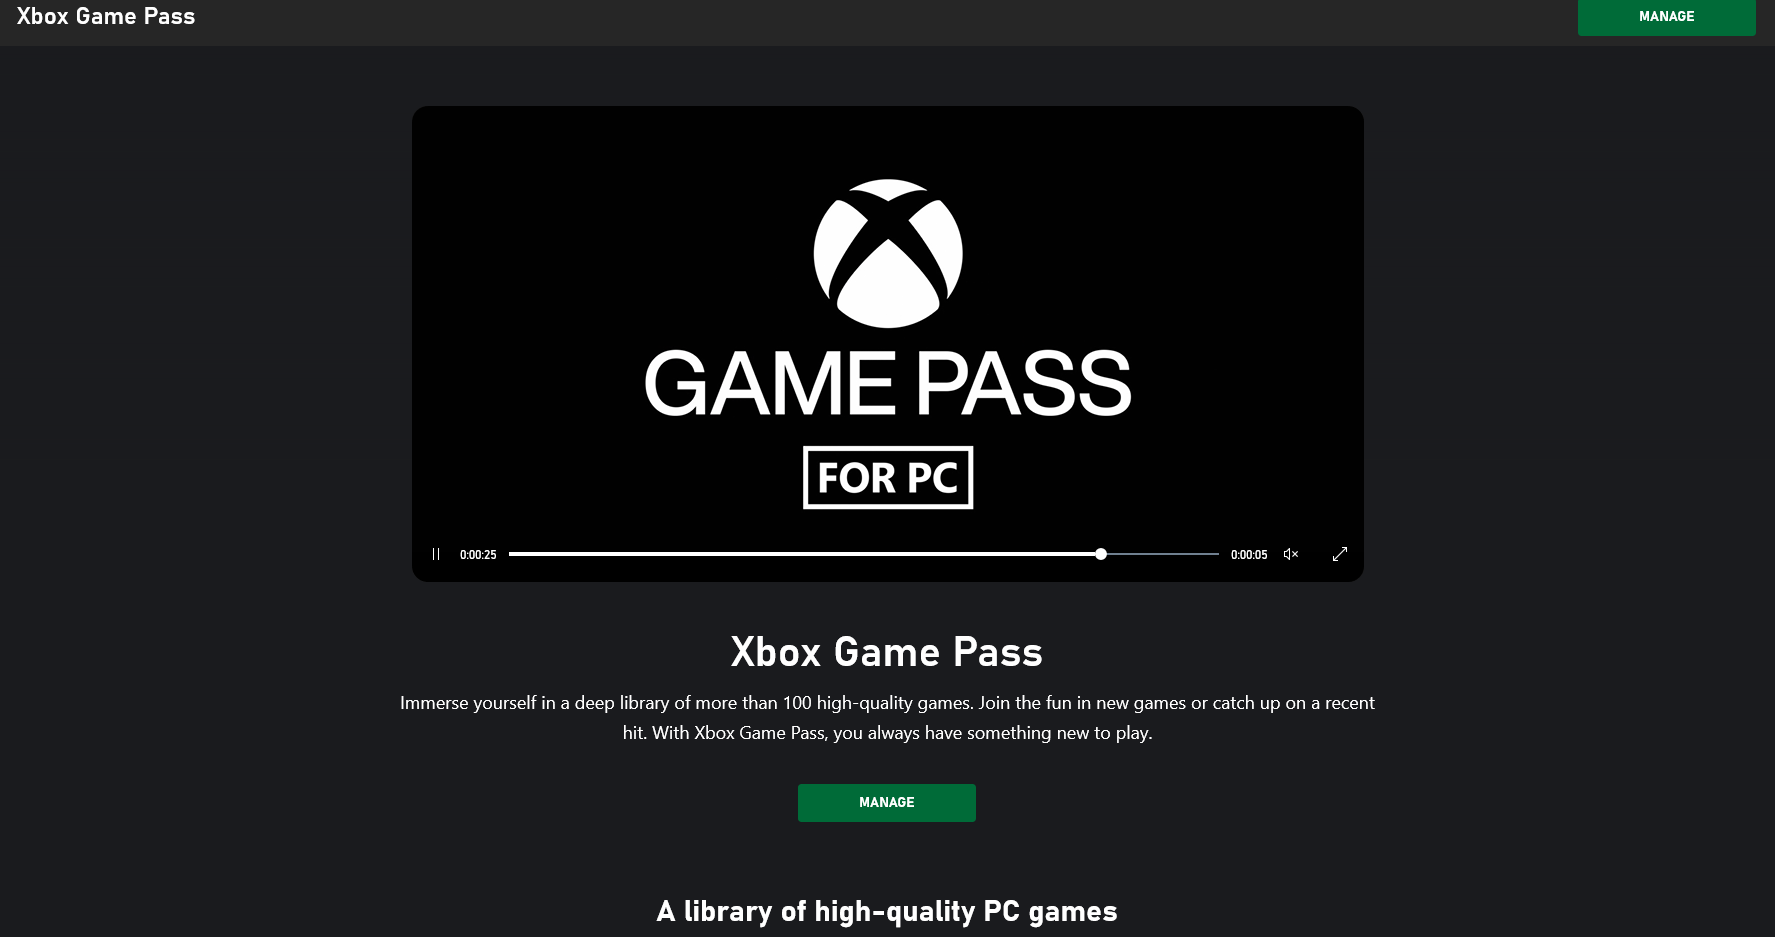 Back 4 Blood is Now Available to Play via Xbox Game Pass